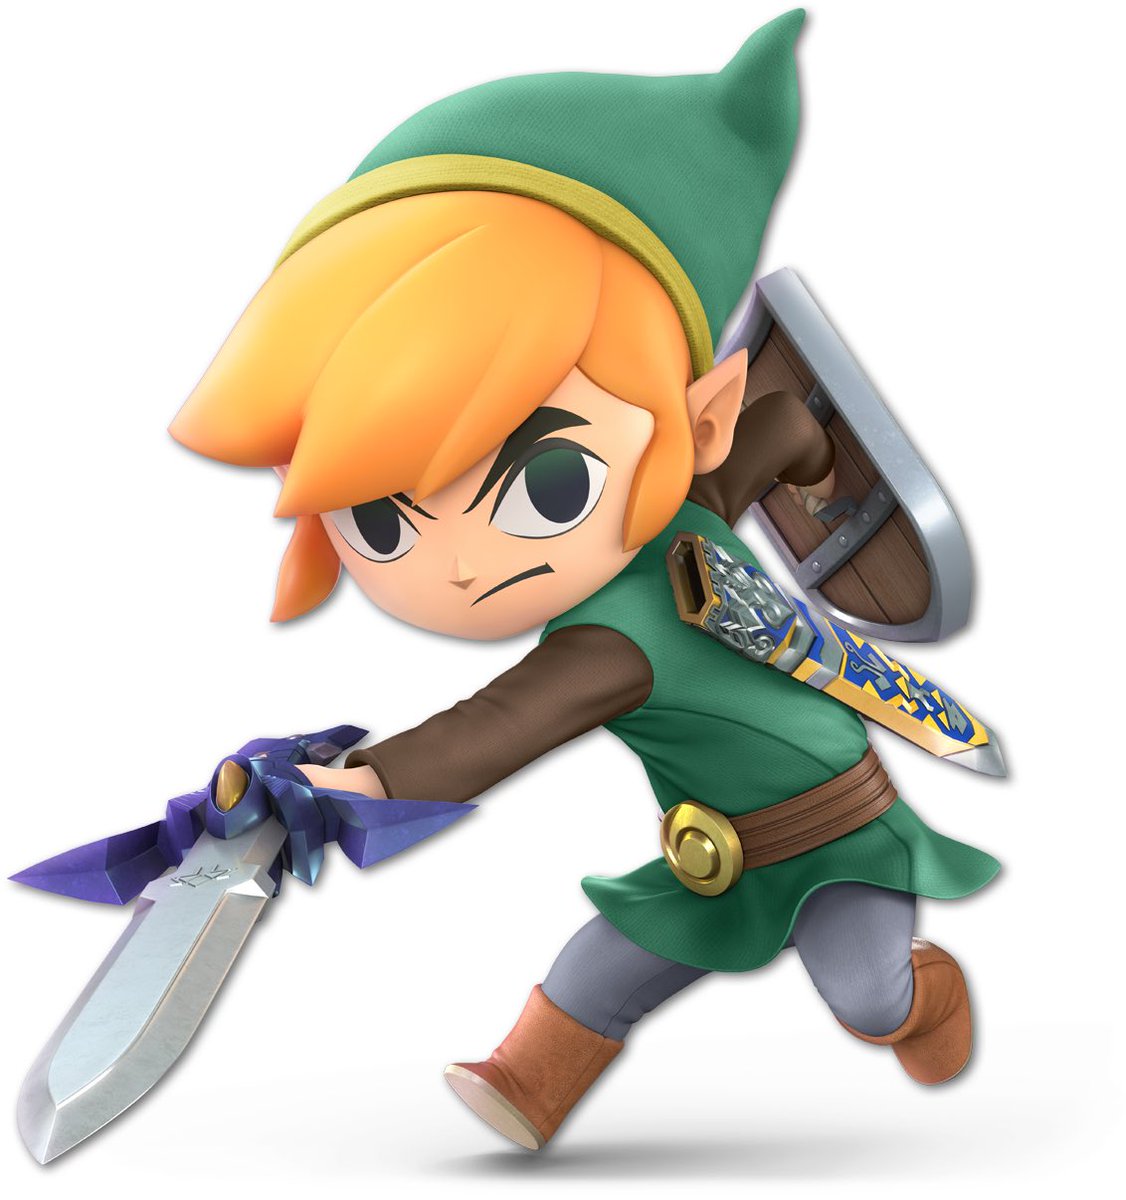 Link Mains: Link Mains have usually high functioning sociopaths who will run circles around you with their mind games like GODS. They usually think OOT is the greatest zelda game in history. When their mistaken because its clearly Majora’s Mask.